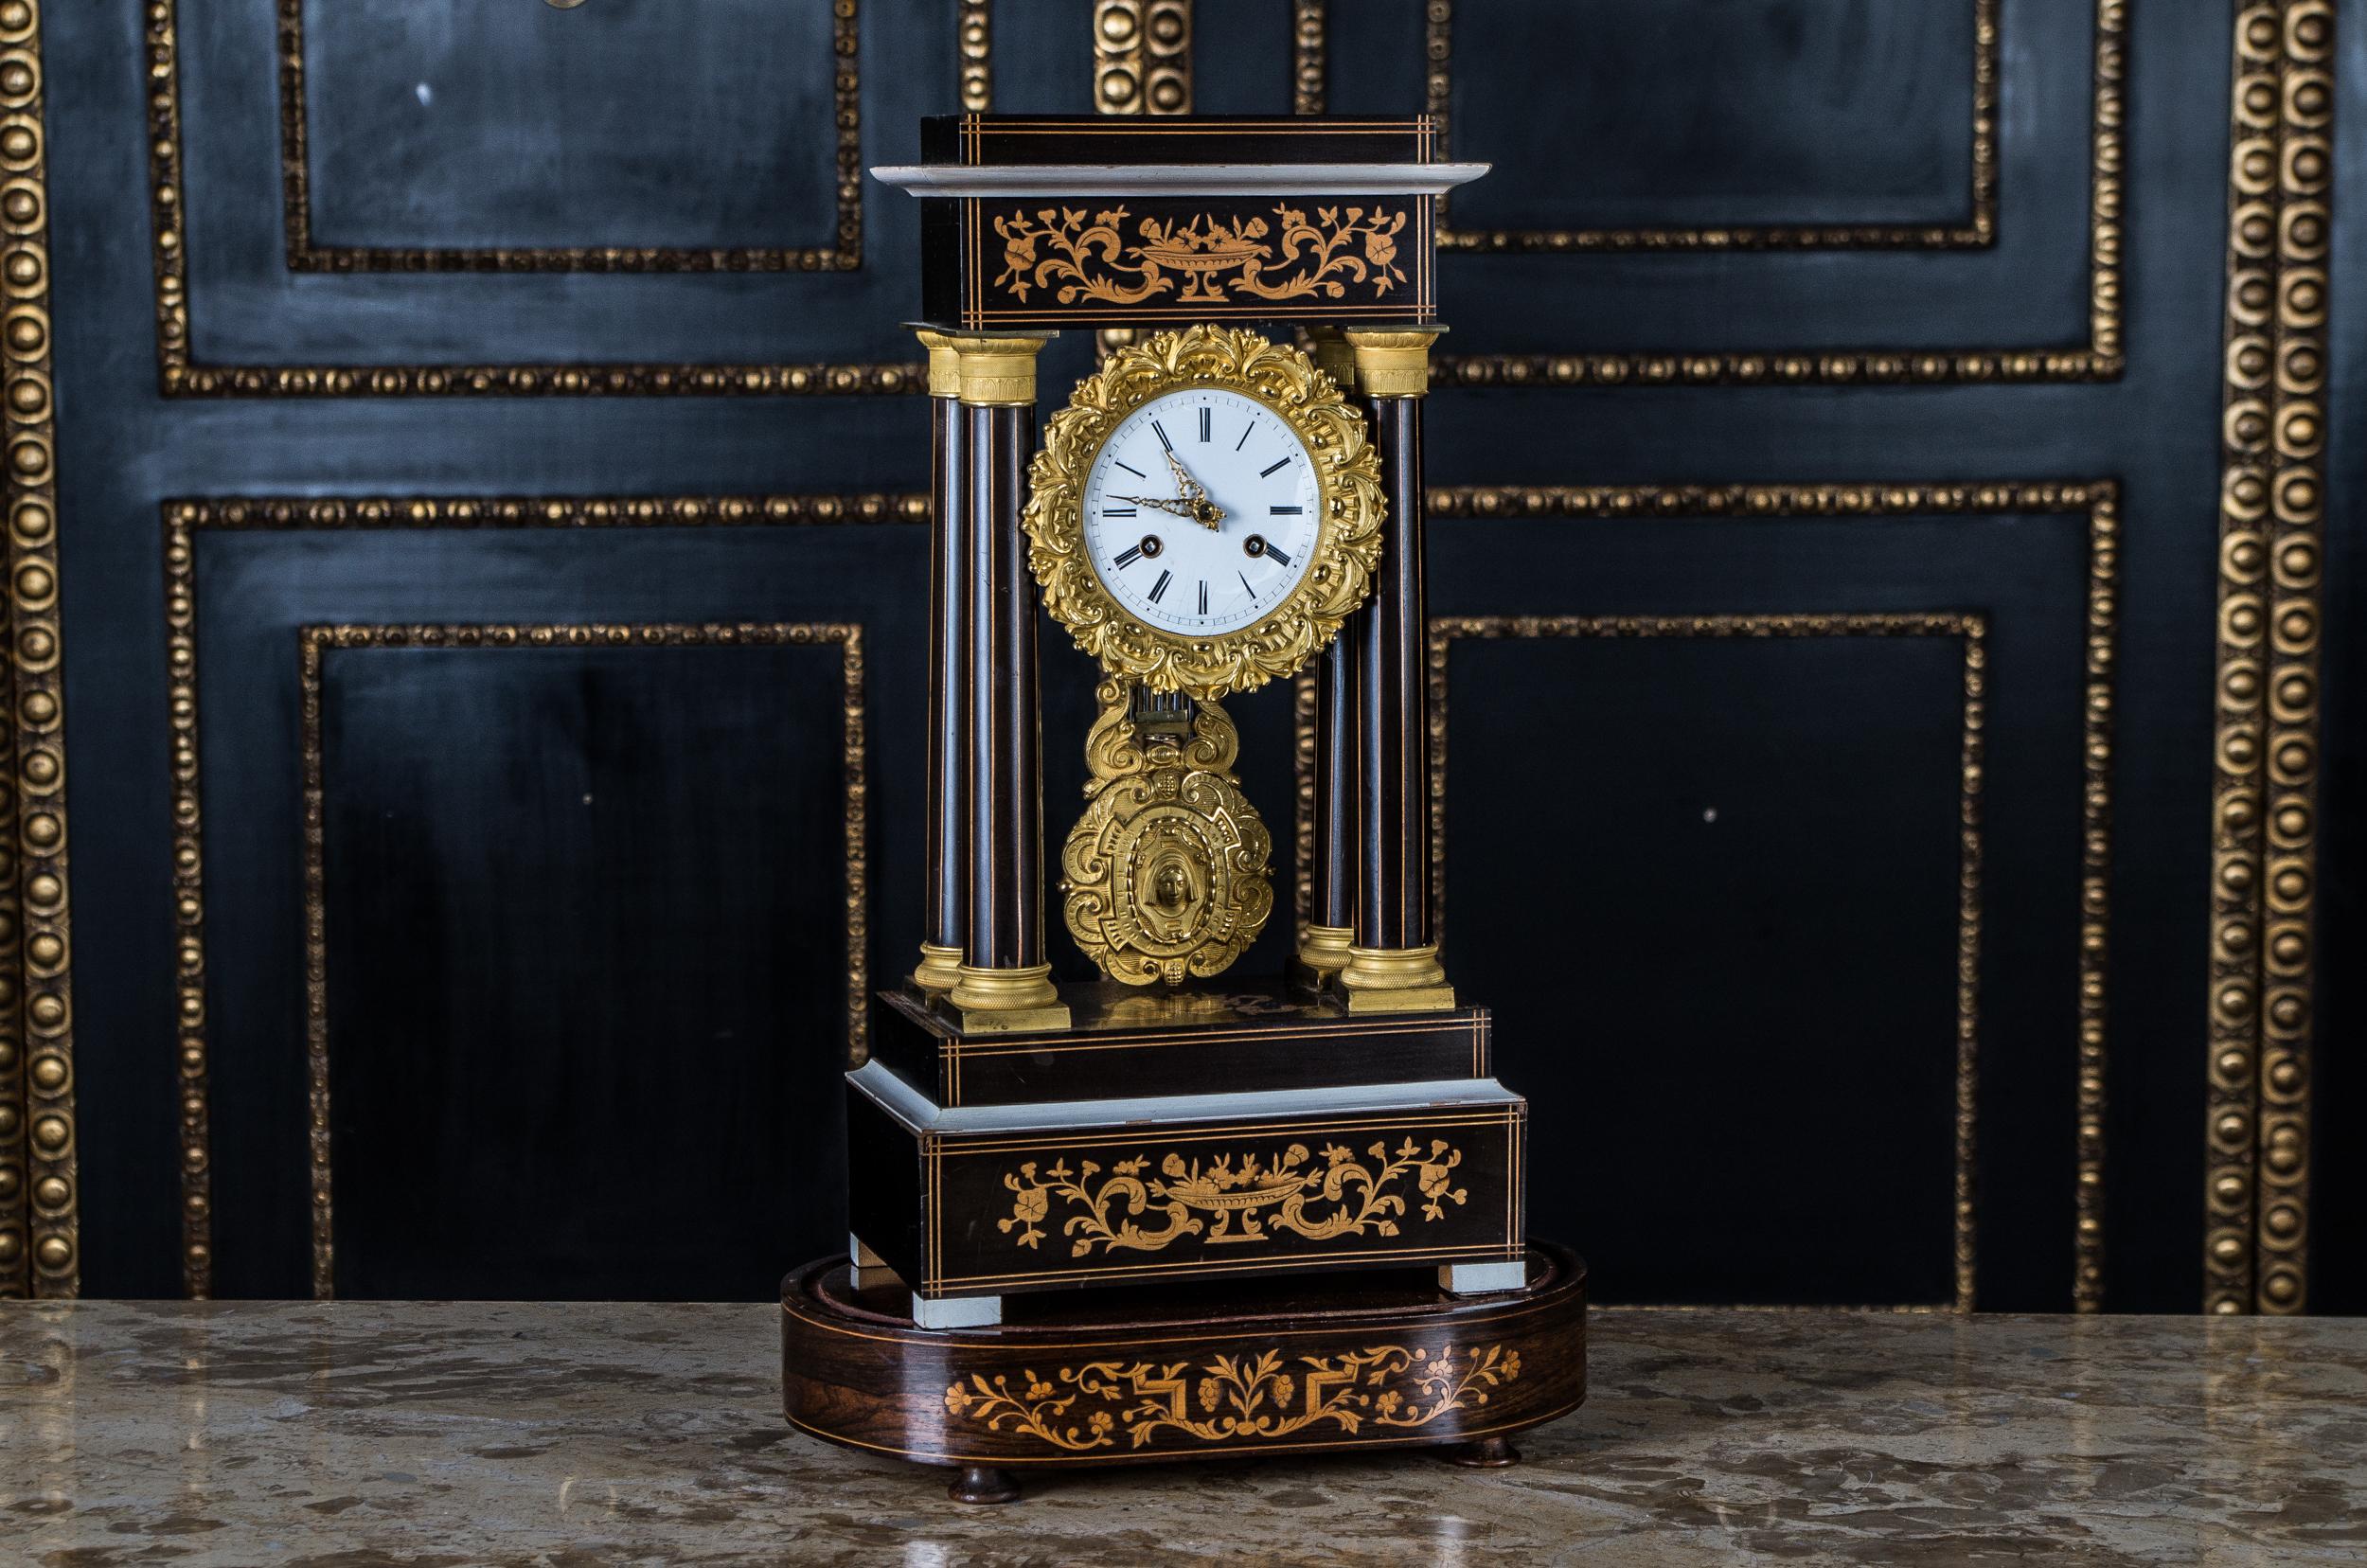 Rosewood with tendril and thread inserts. Rectangular base with four columns and the clock hung under the architrave. Dial Email. Gold-plated brass bezel and decorated gold compensation pendulum.